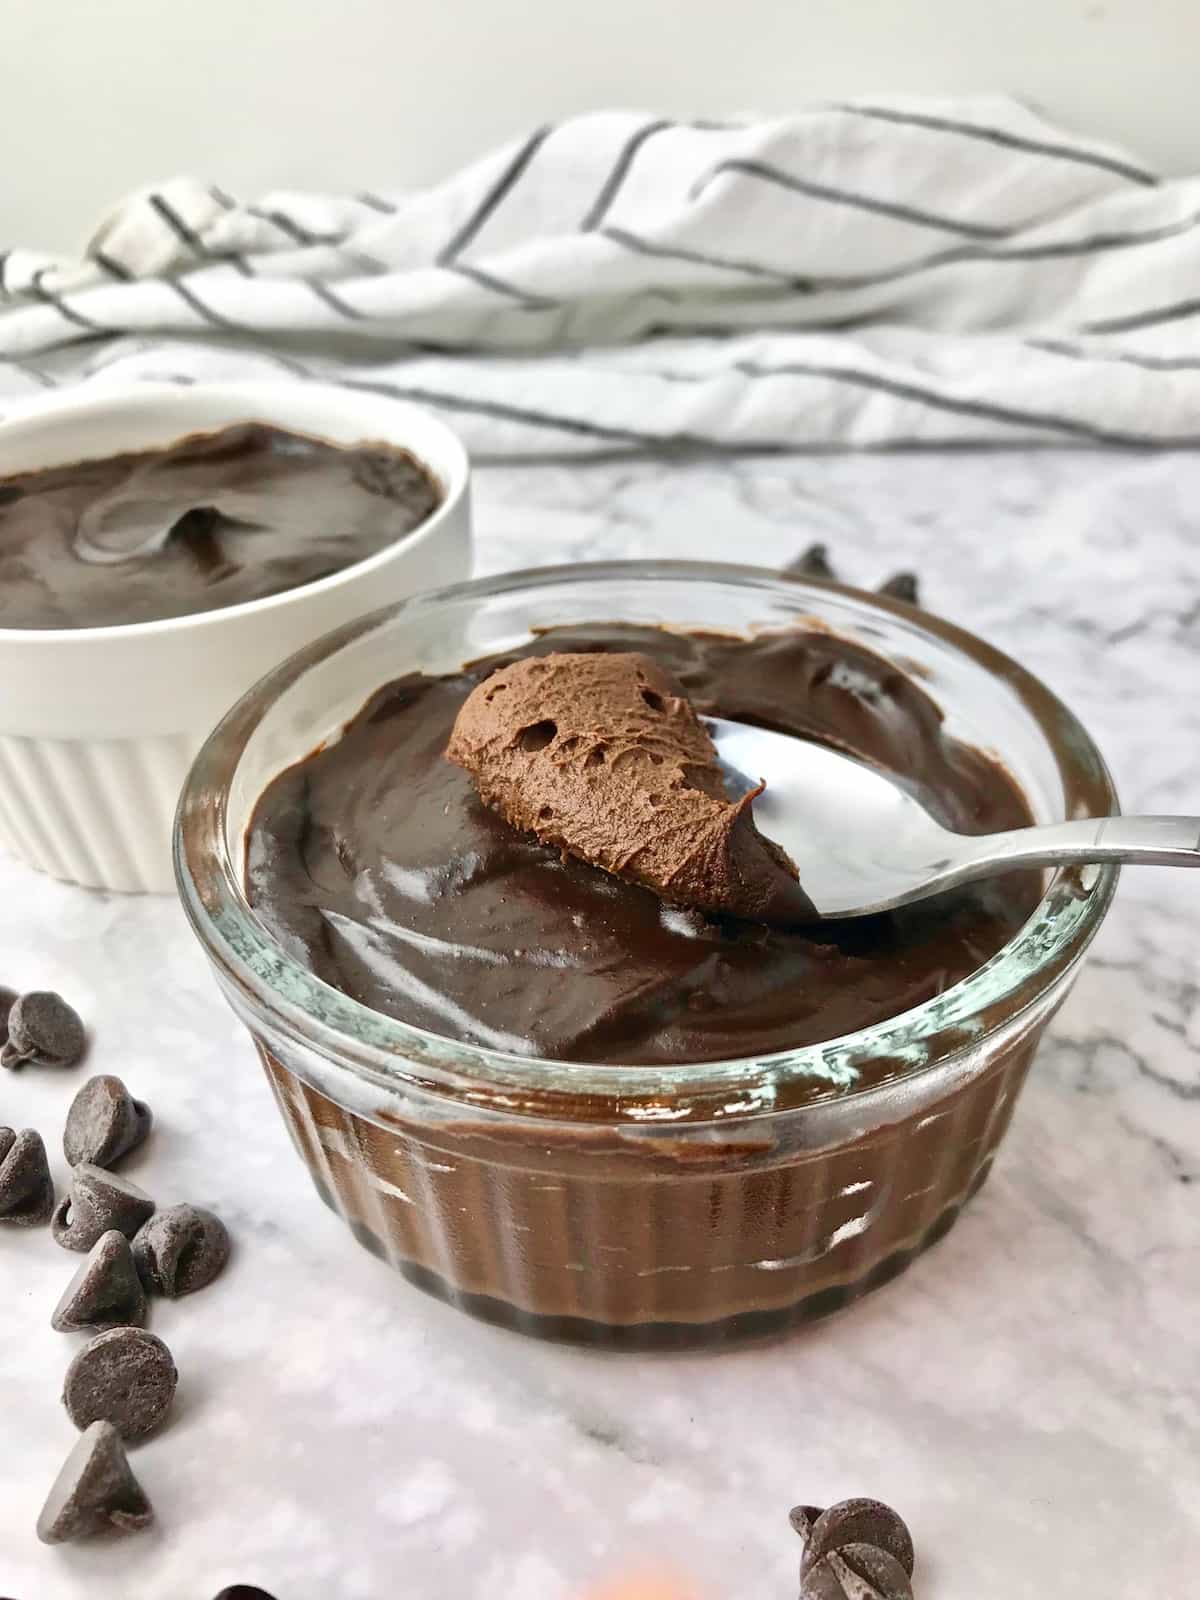 A bowl of chocolate mousse with a spoonful on top, next to some chocolate chips.